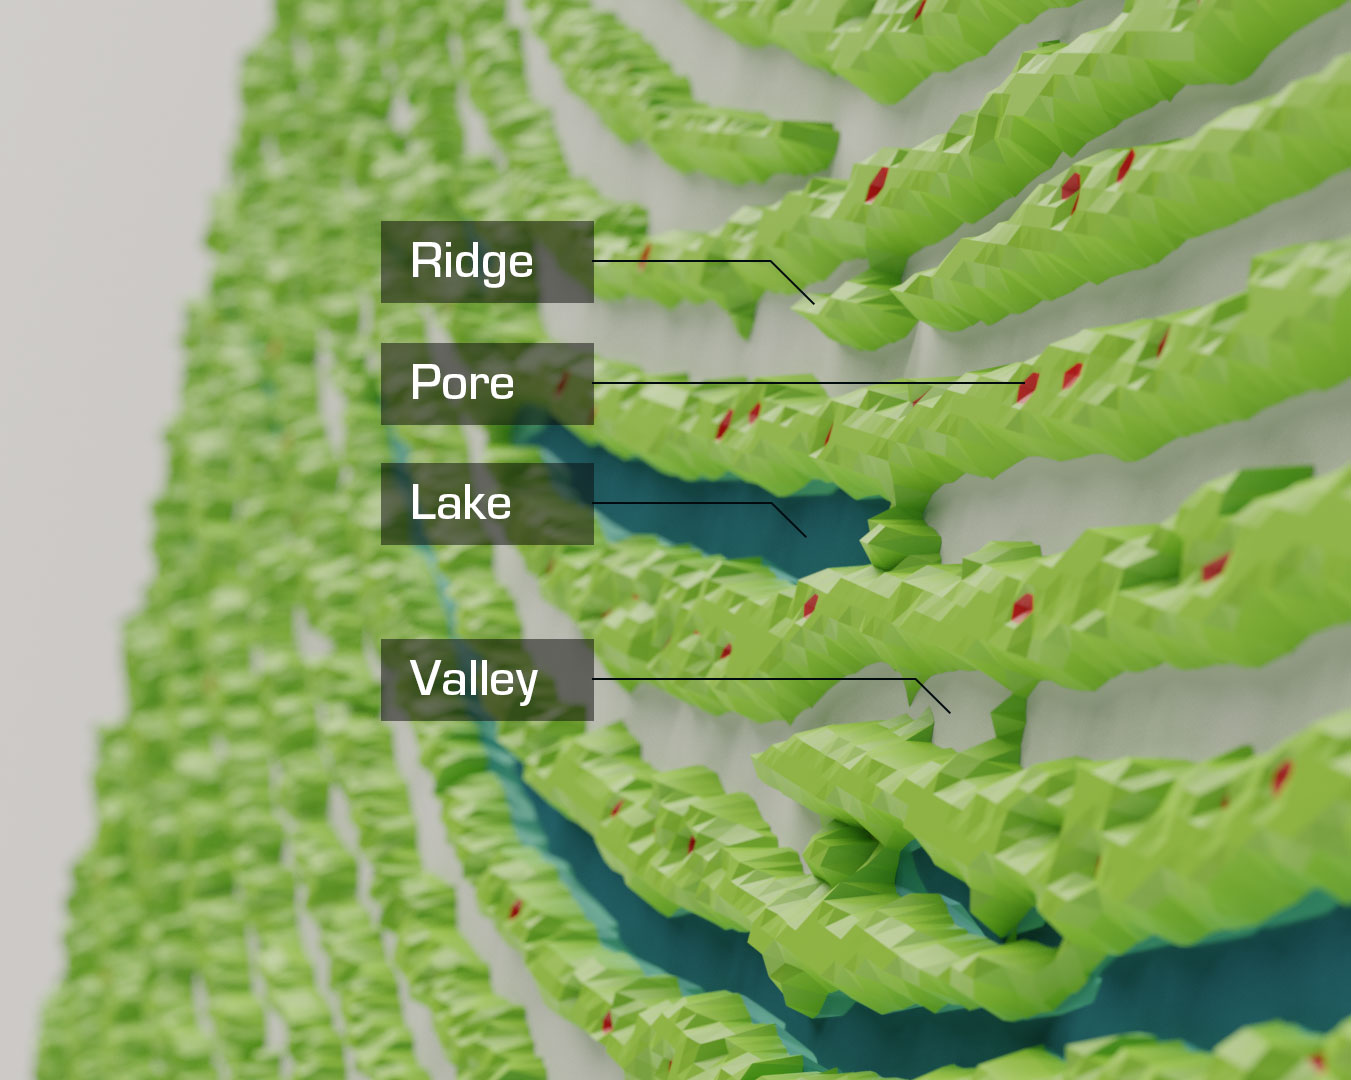 An image pointing out ridges, pores, lakes, and valleys on a fingerprint.